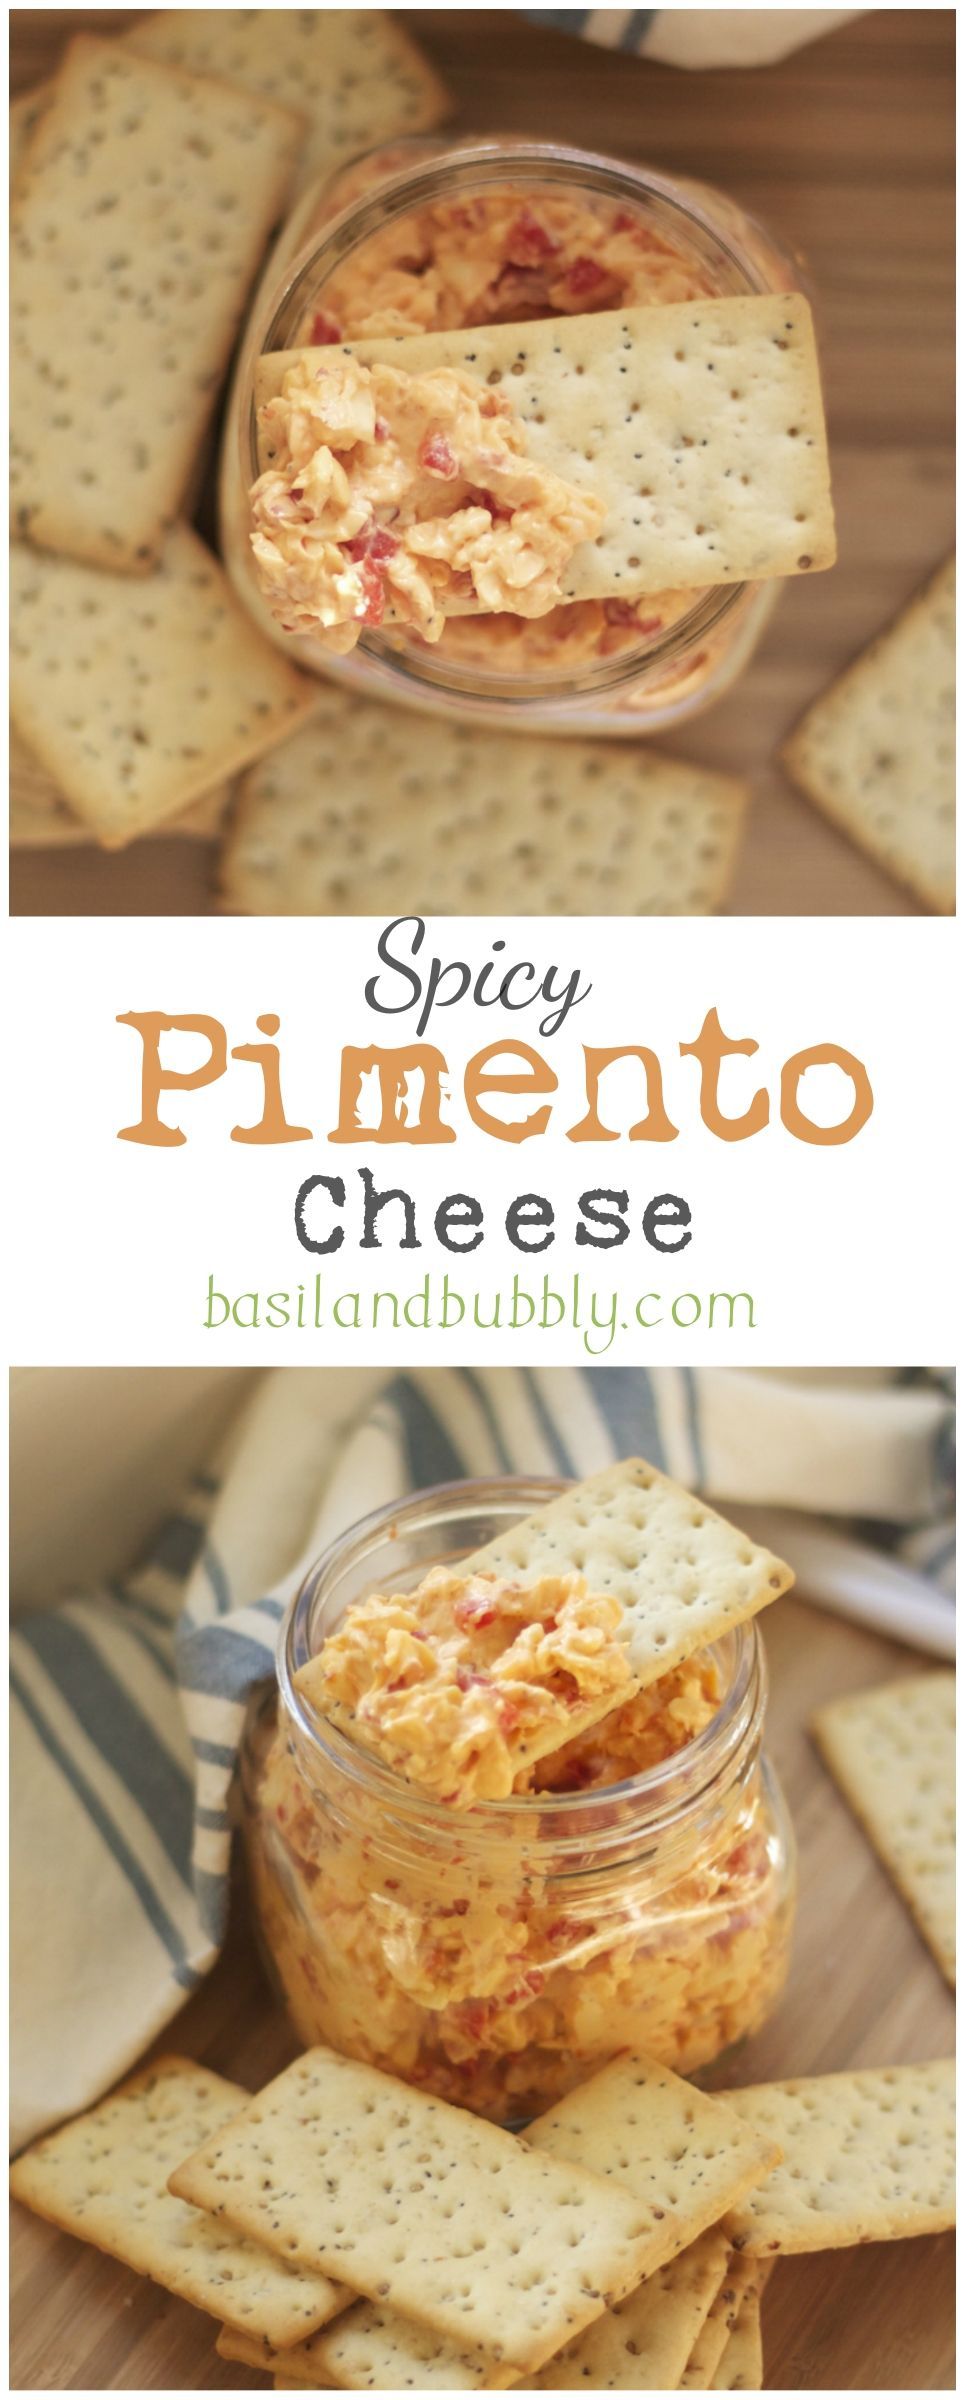 After making this delicious Pimento Cheese, Ill NEVER buy the stuff in the tub again!!!